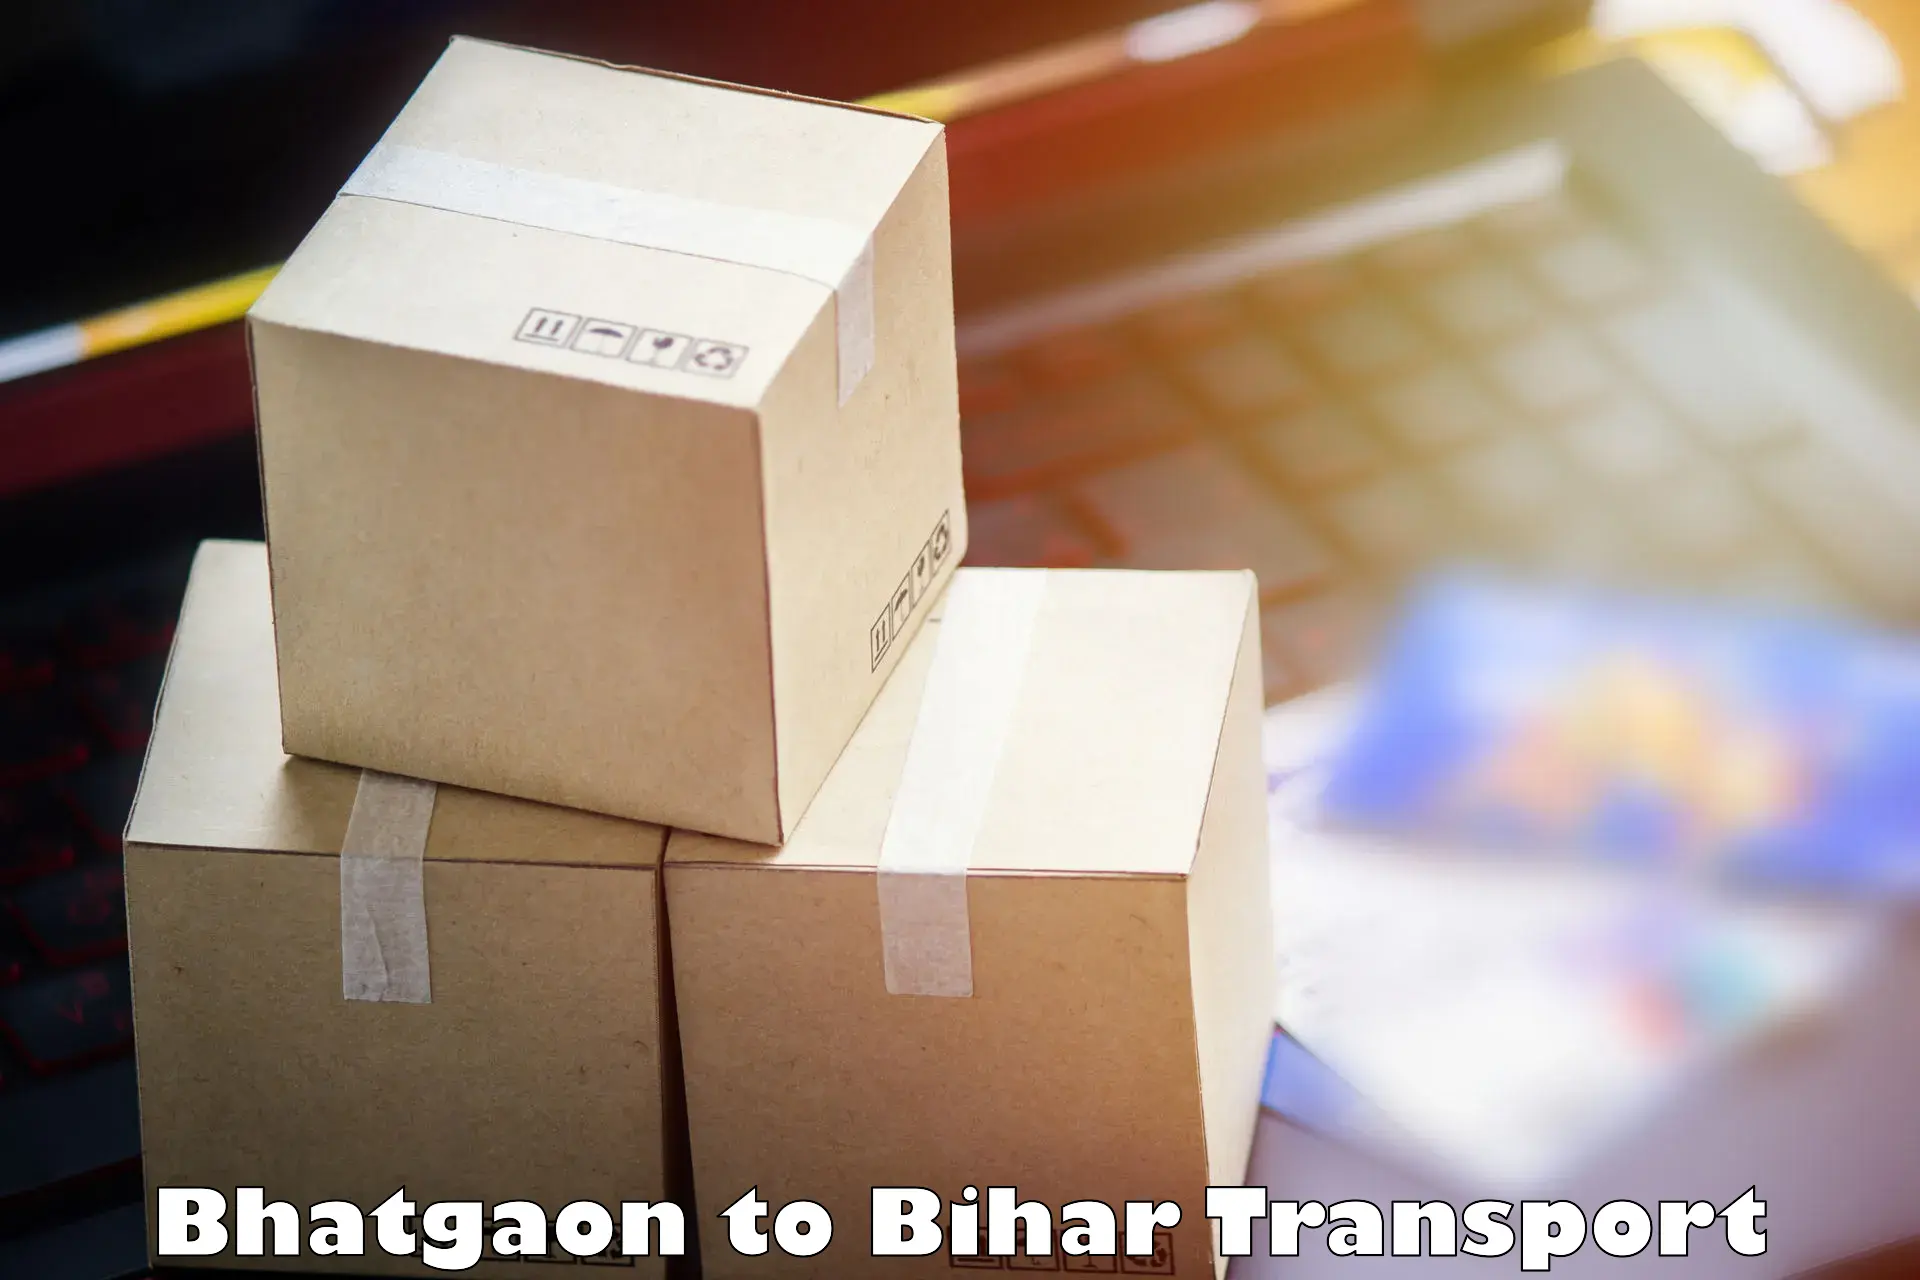 Part load transport service in India Bhatgaon to Bihar